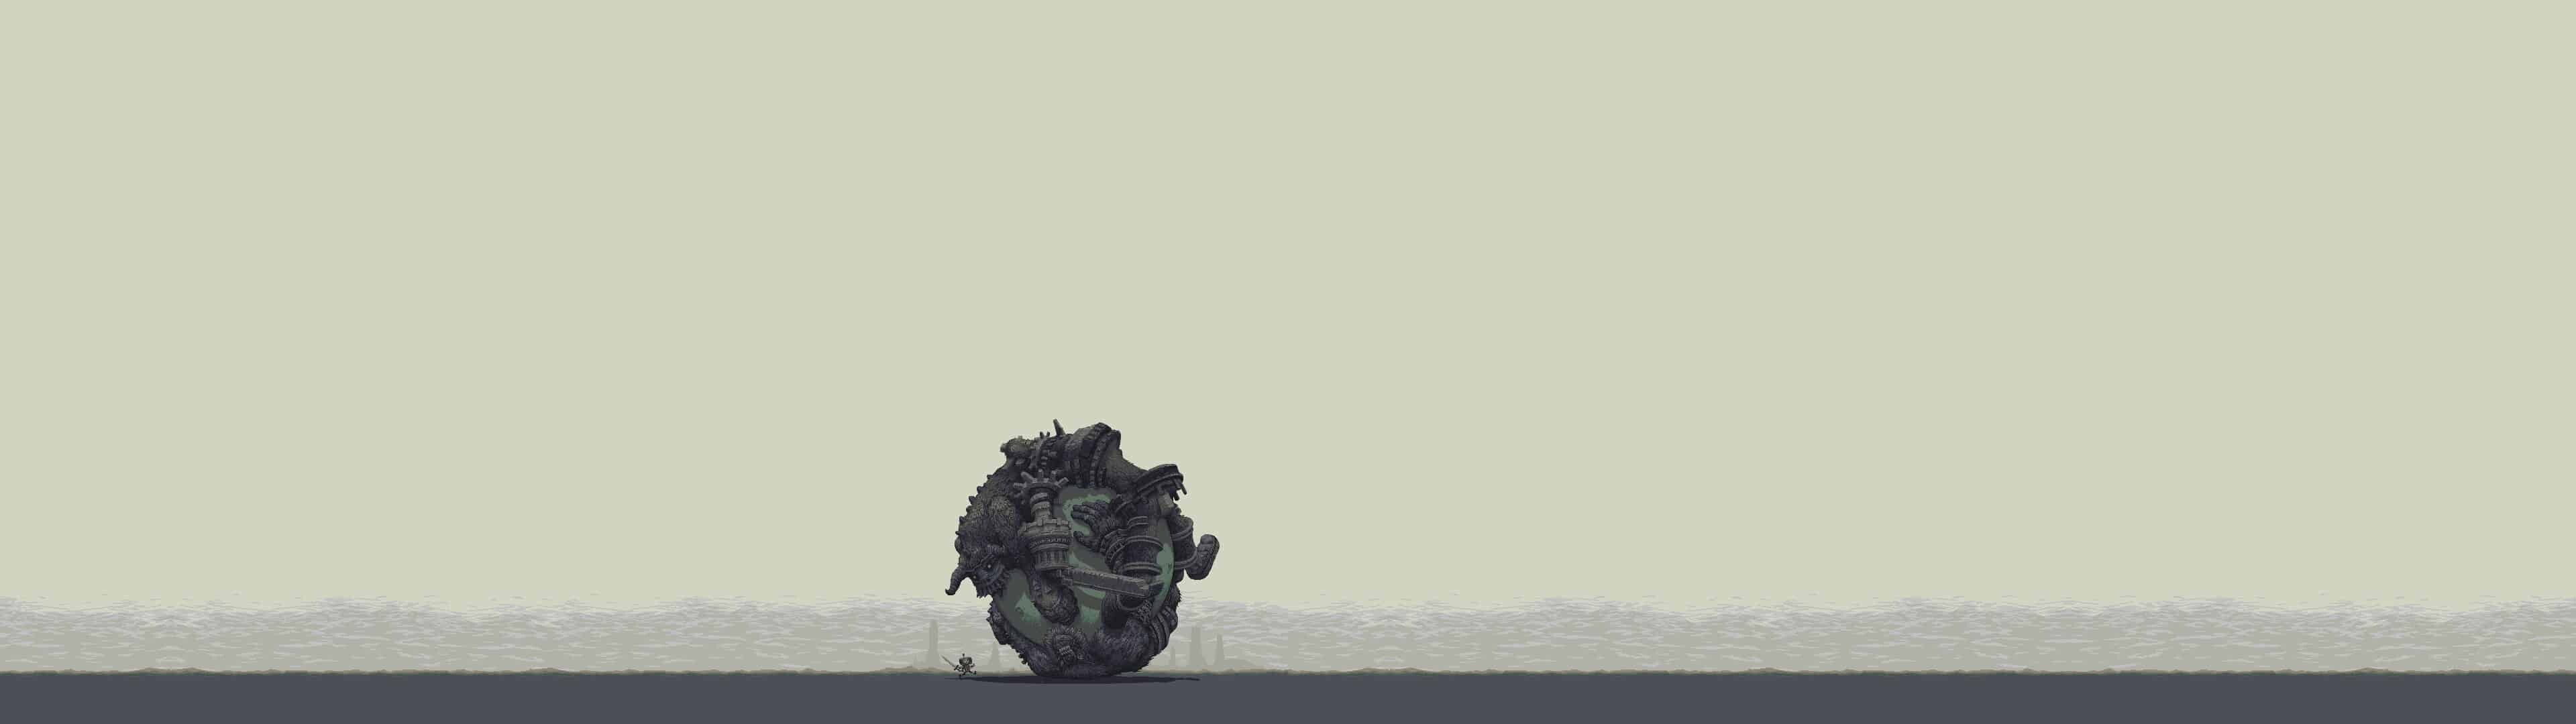 Shadow of the Colossus: Received "Best Character Design" award at the 2006 Game Developers Choice Awards. 3840x1080 Dual Screen Wallpaper.